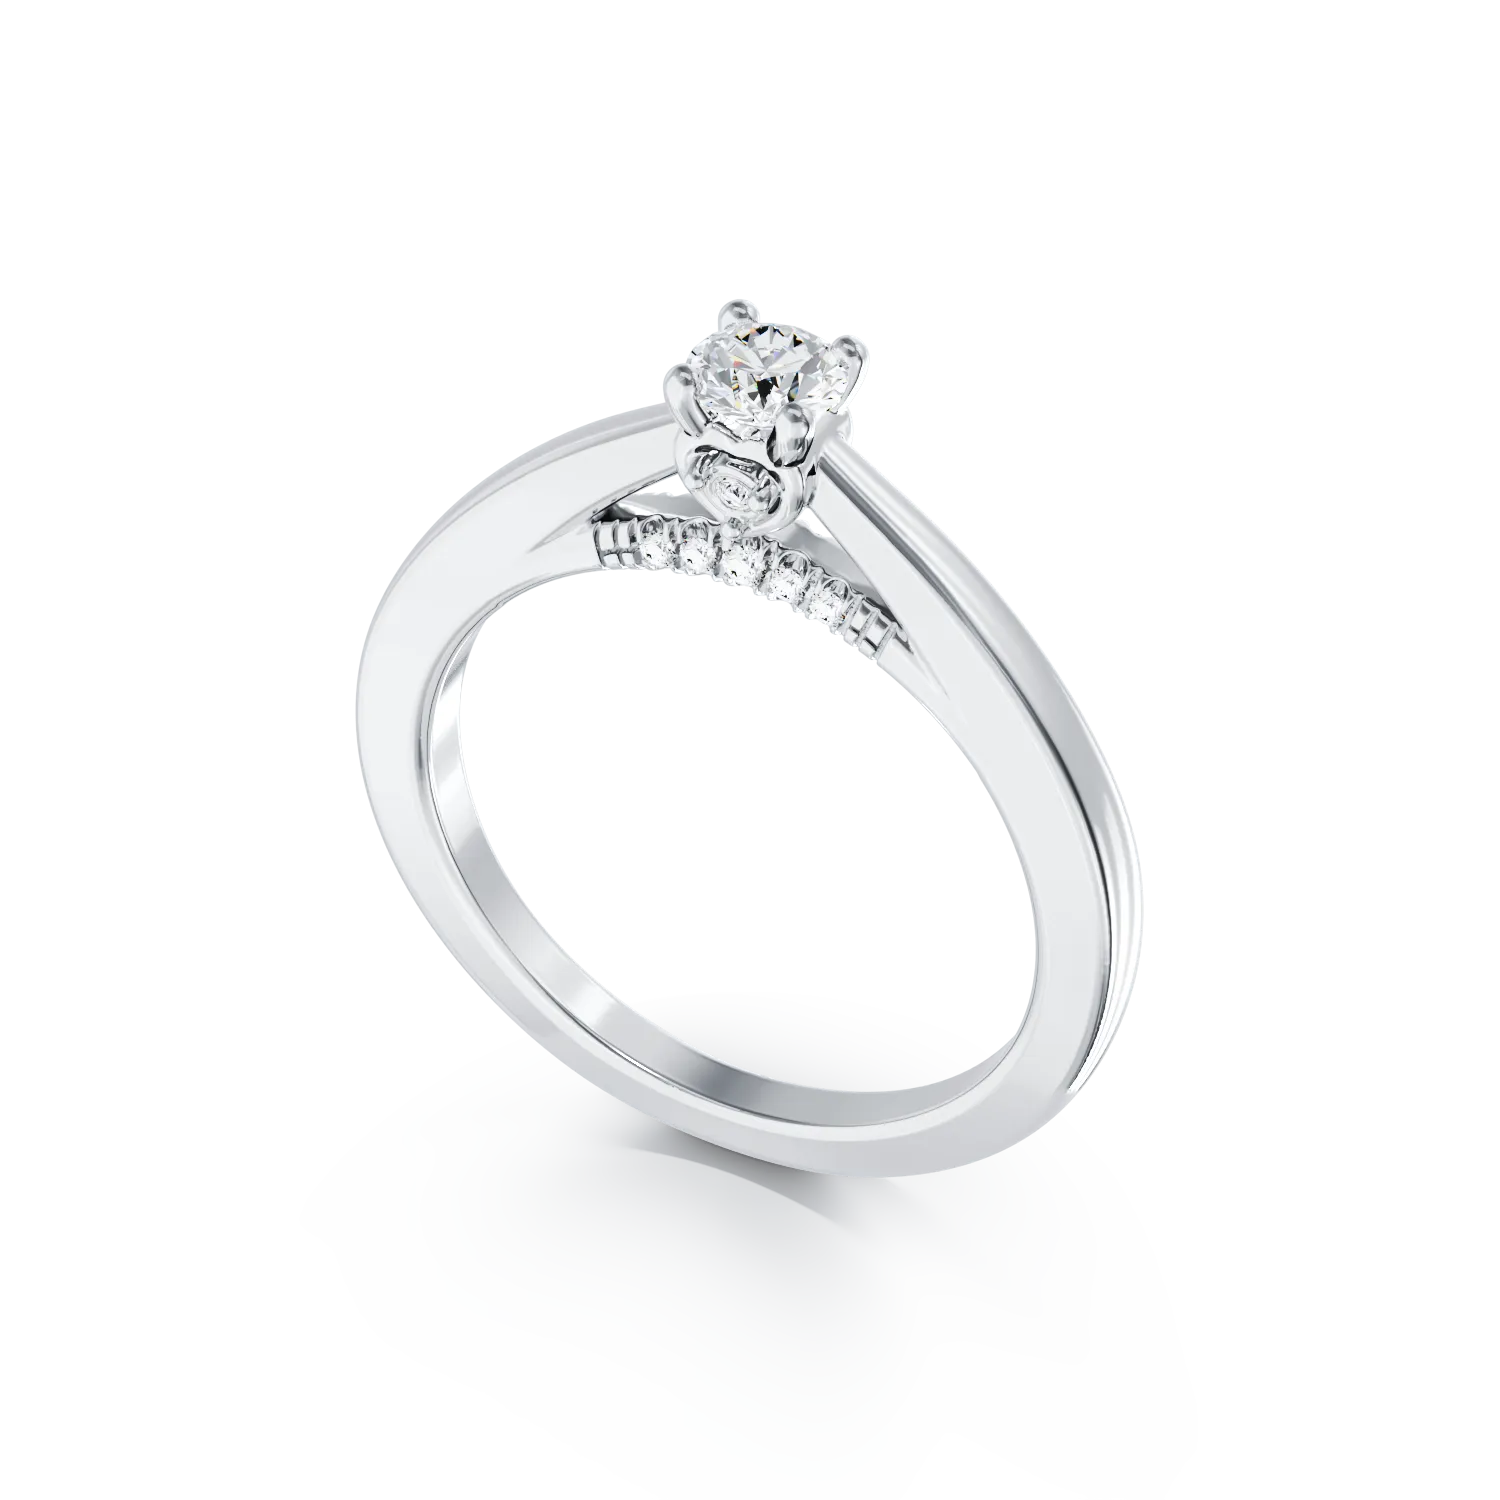 18K white gold engagement ring with 0.31ct diamond and 0.04ct diamonds